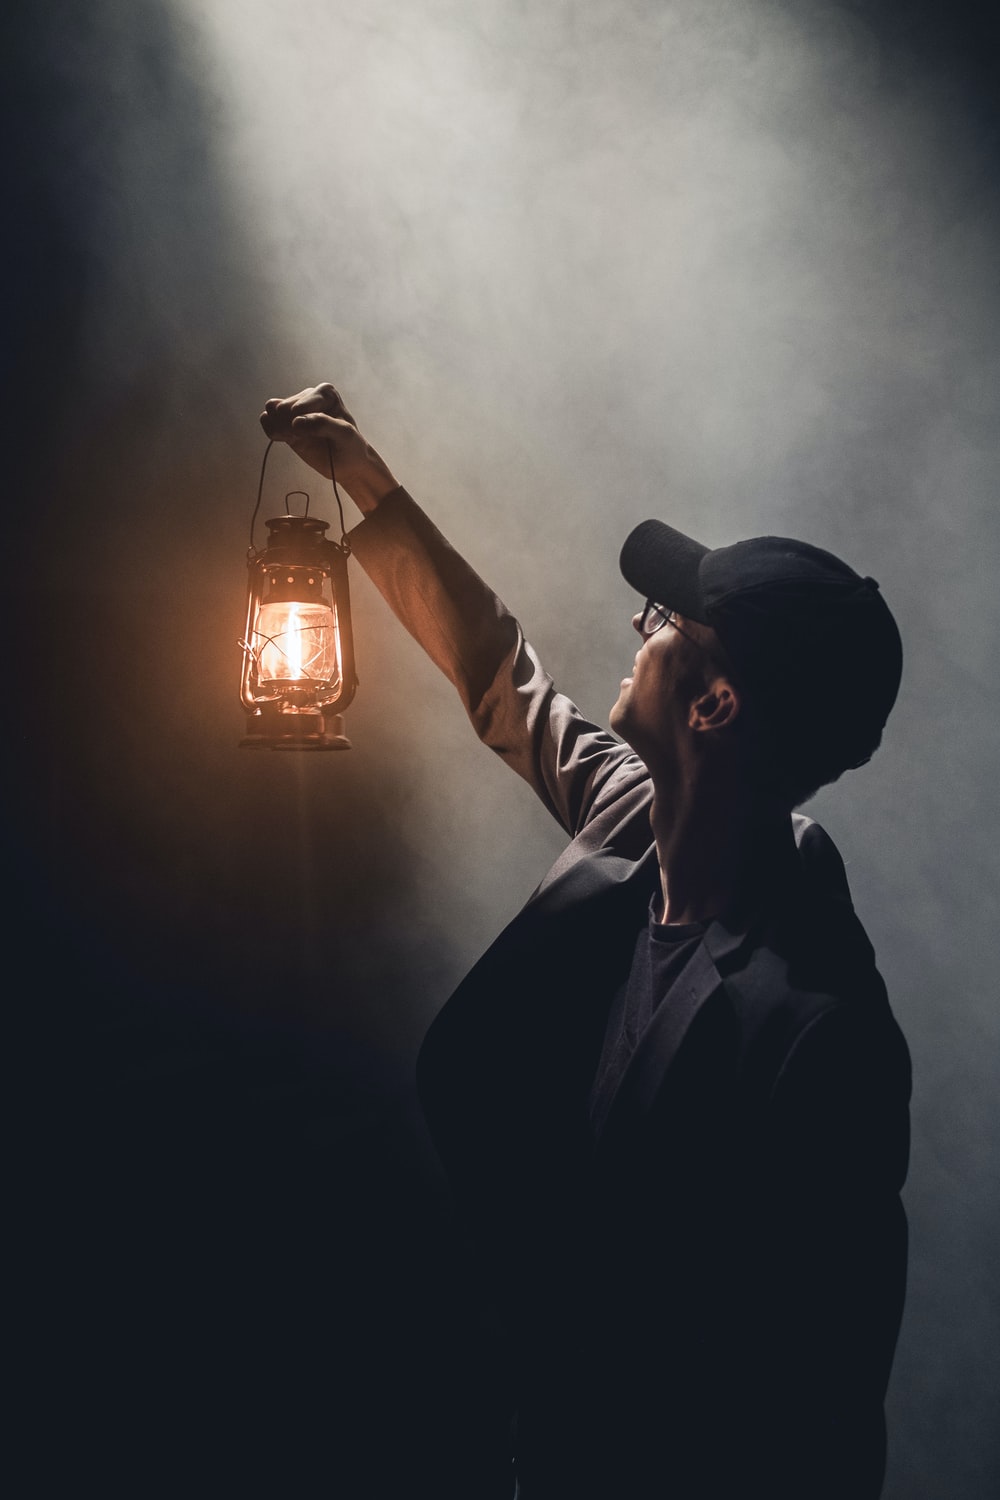 Holding Lamp Picture. Download Free Image